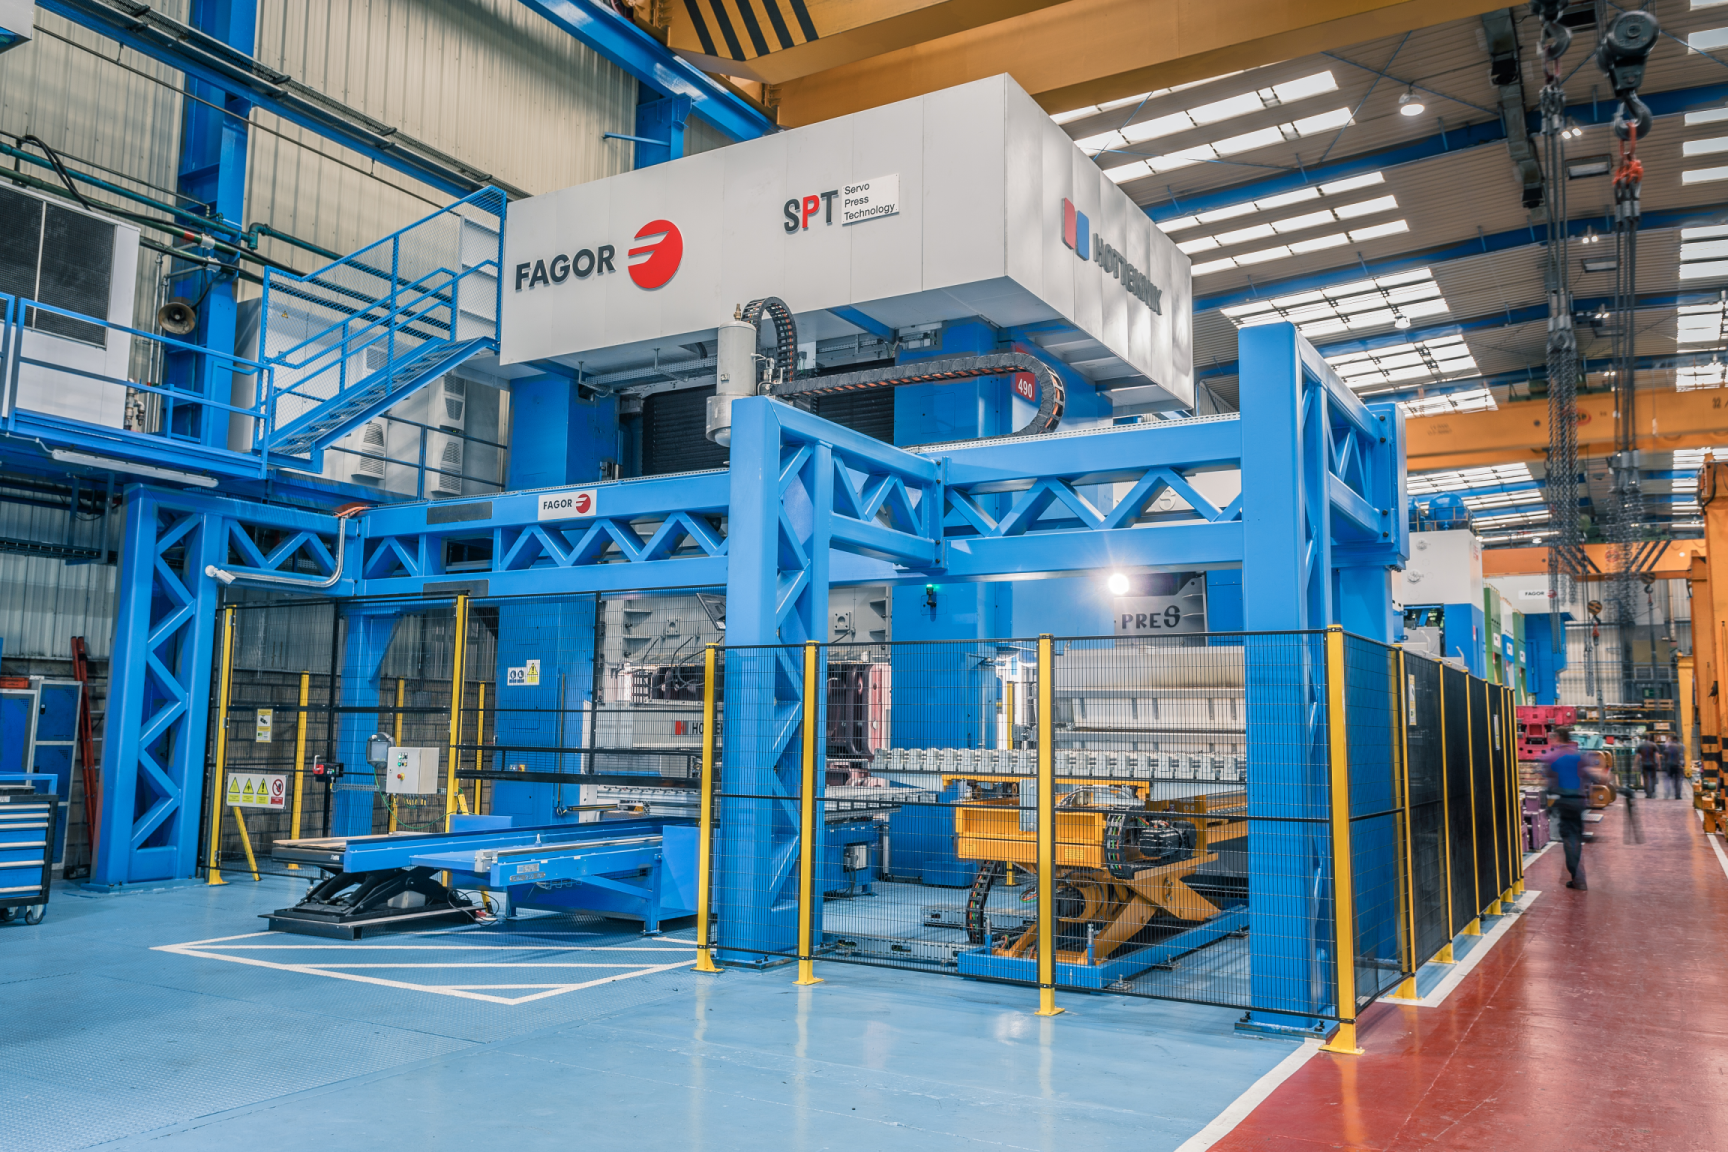 Read more about the article Impression Technologies and Fagor Arrasate Announce a Partnership to Provide High Volume Aluminium Hot Form Quench (HFQ®) Production Line Solutions to the Global Automotive Market